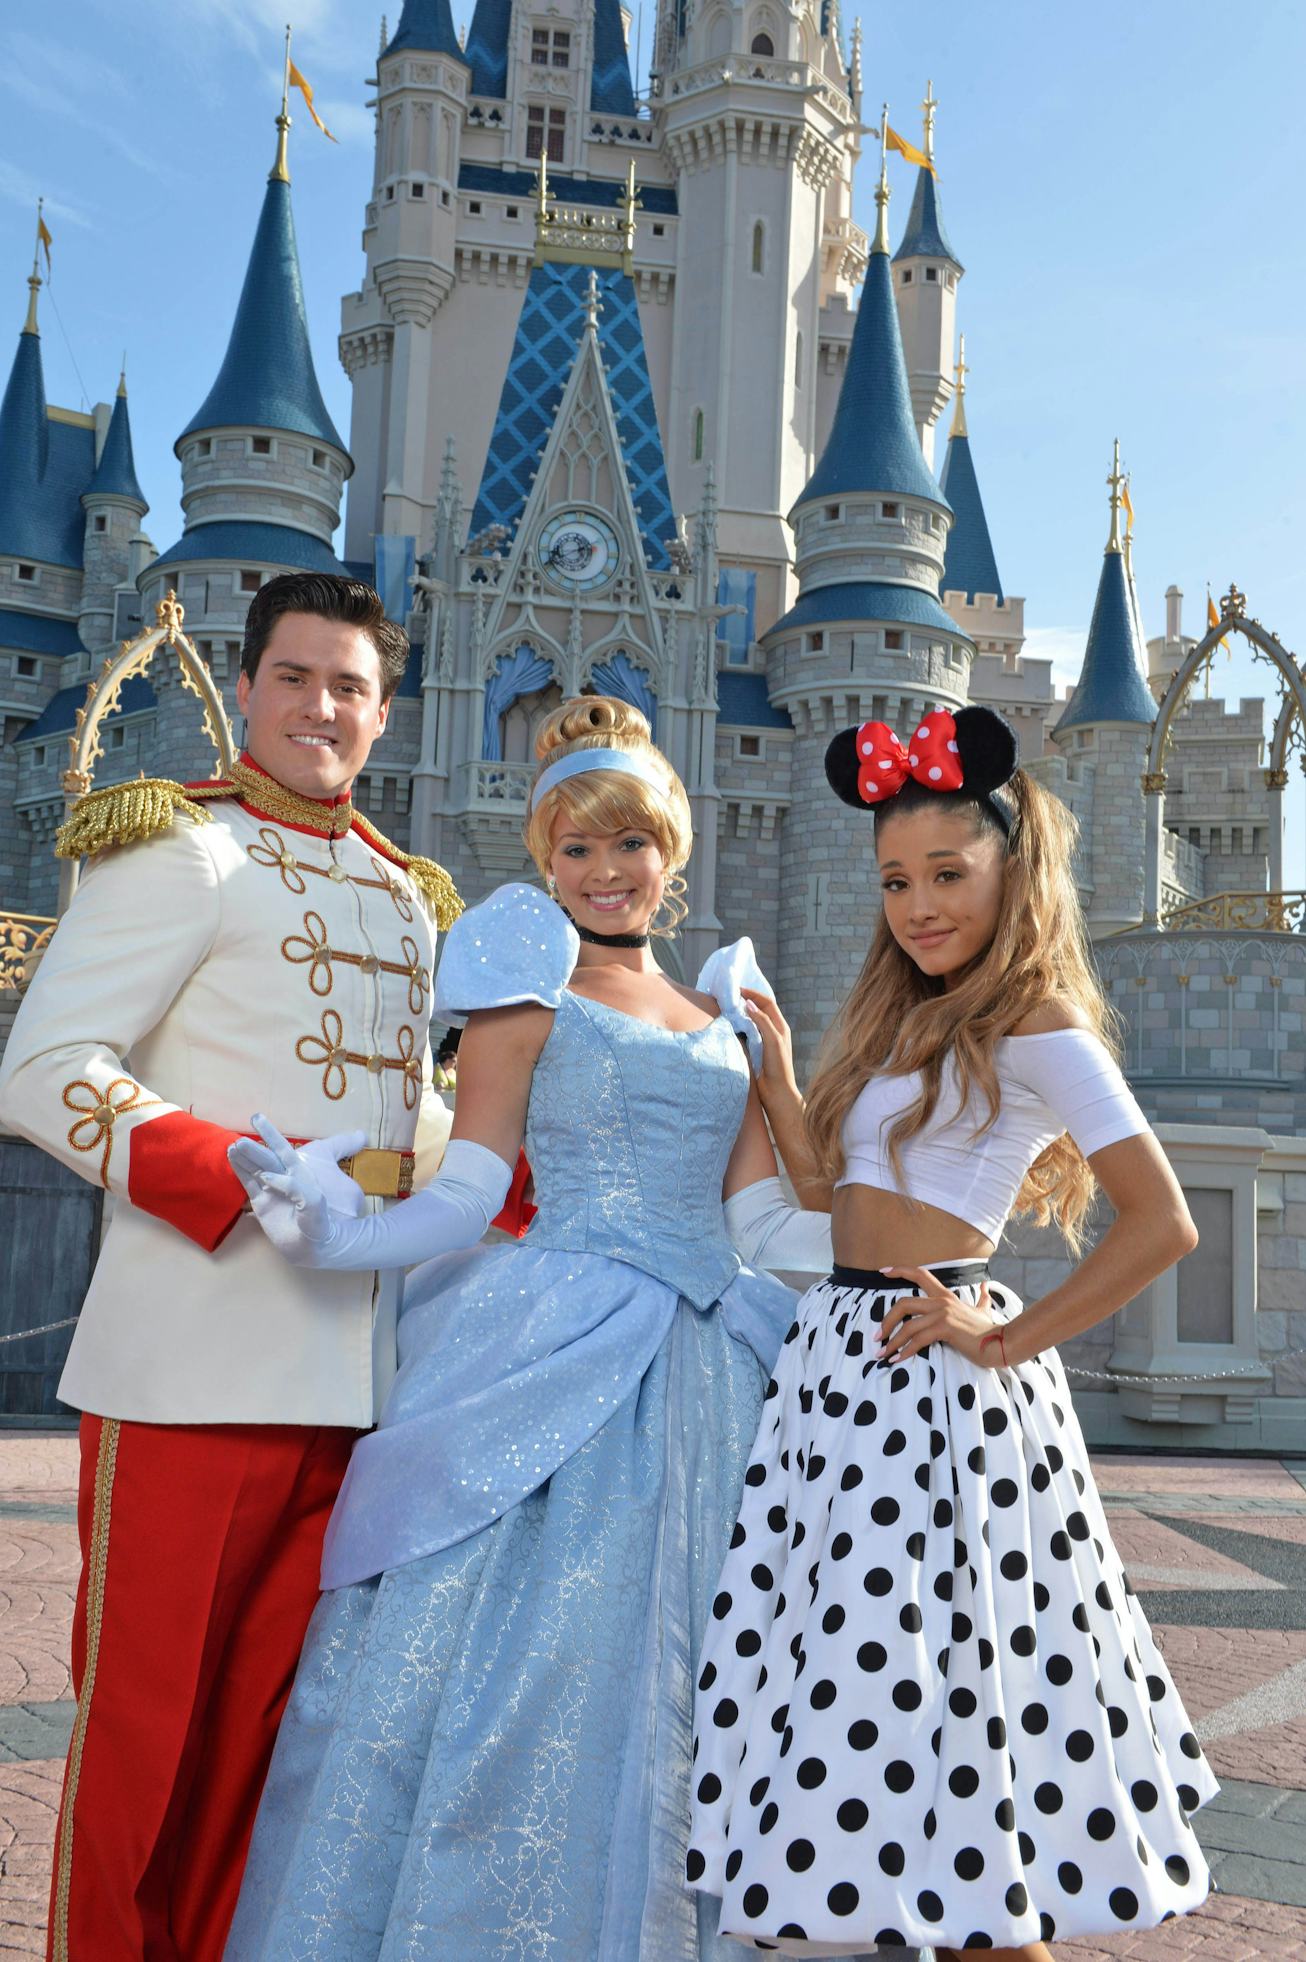 Ariana Grande at Disney World for her 21st birthday in 2014.